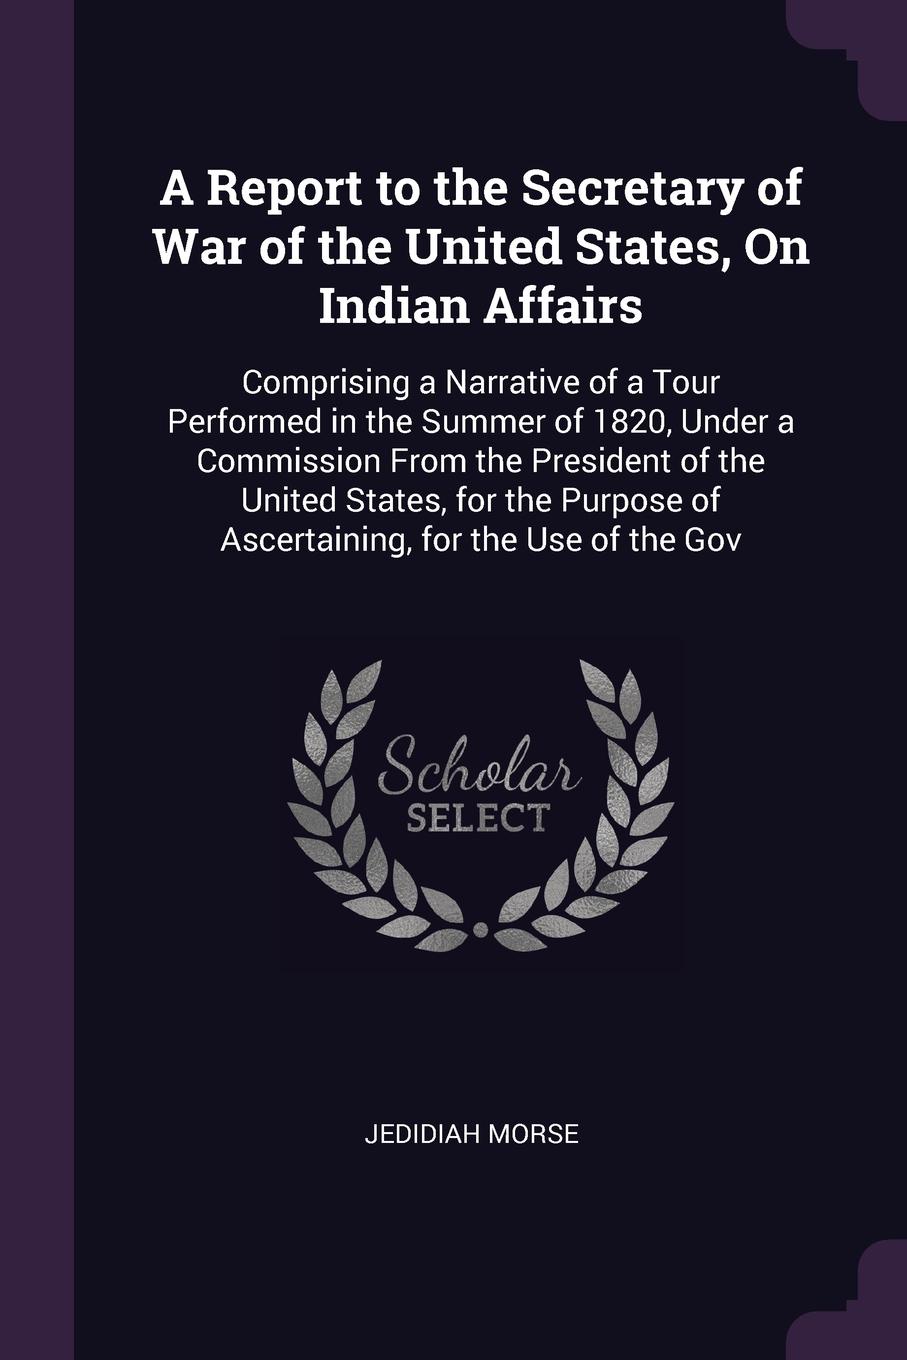 A Report to the Secretary of War of the United States, On Indian Affairs. Comprising a Narrative of a Tour Performed in the Summer of 1820, Under a Commission From the President of the United States, for the Purpose of Ascertaining, for the Use of...